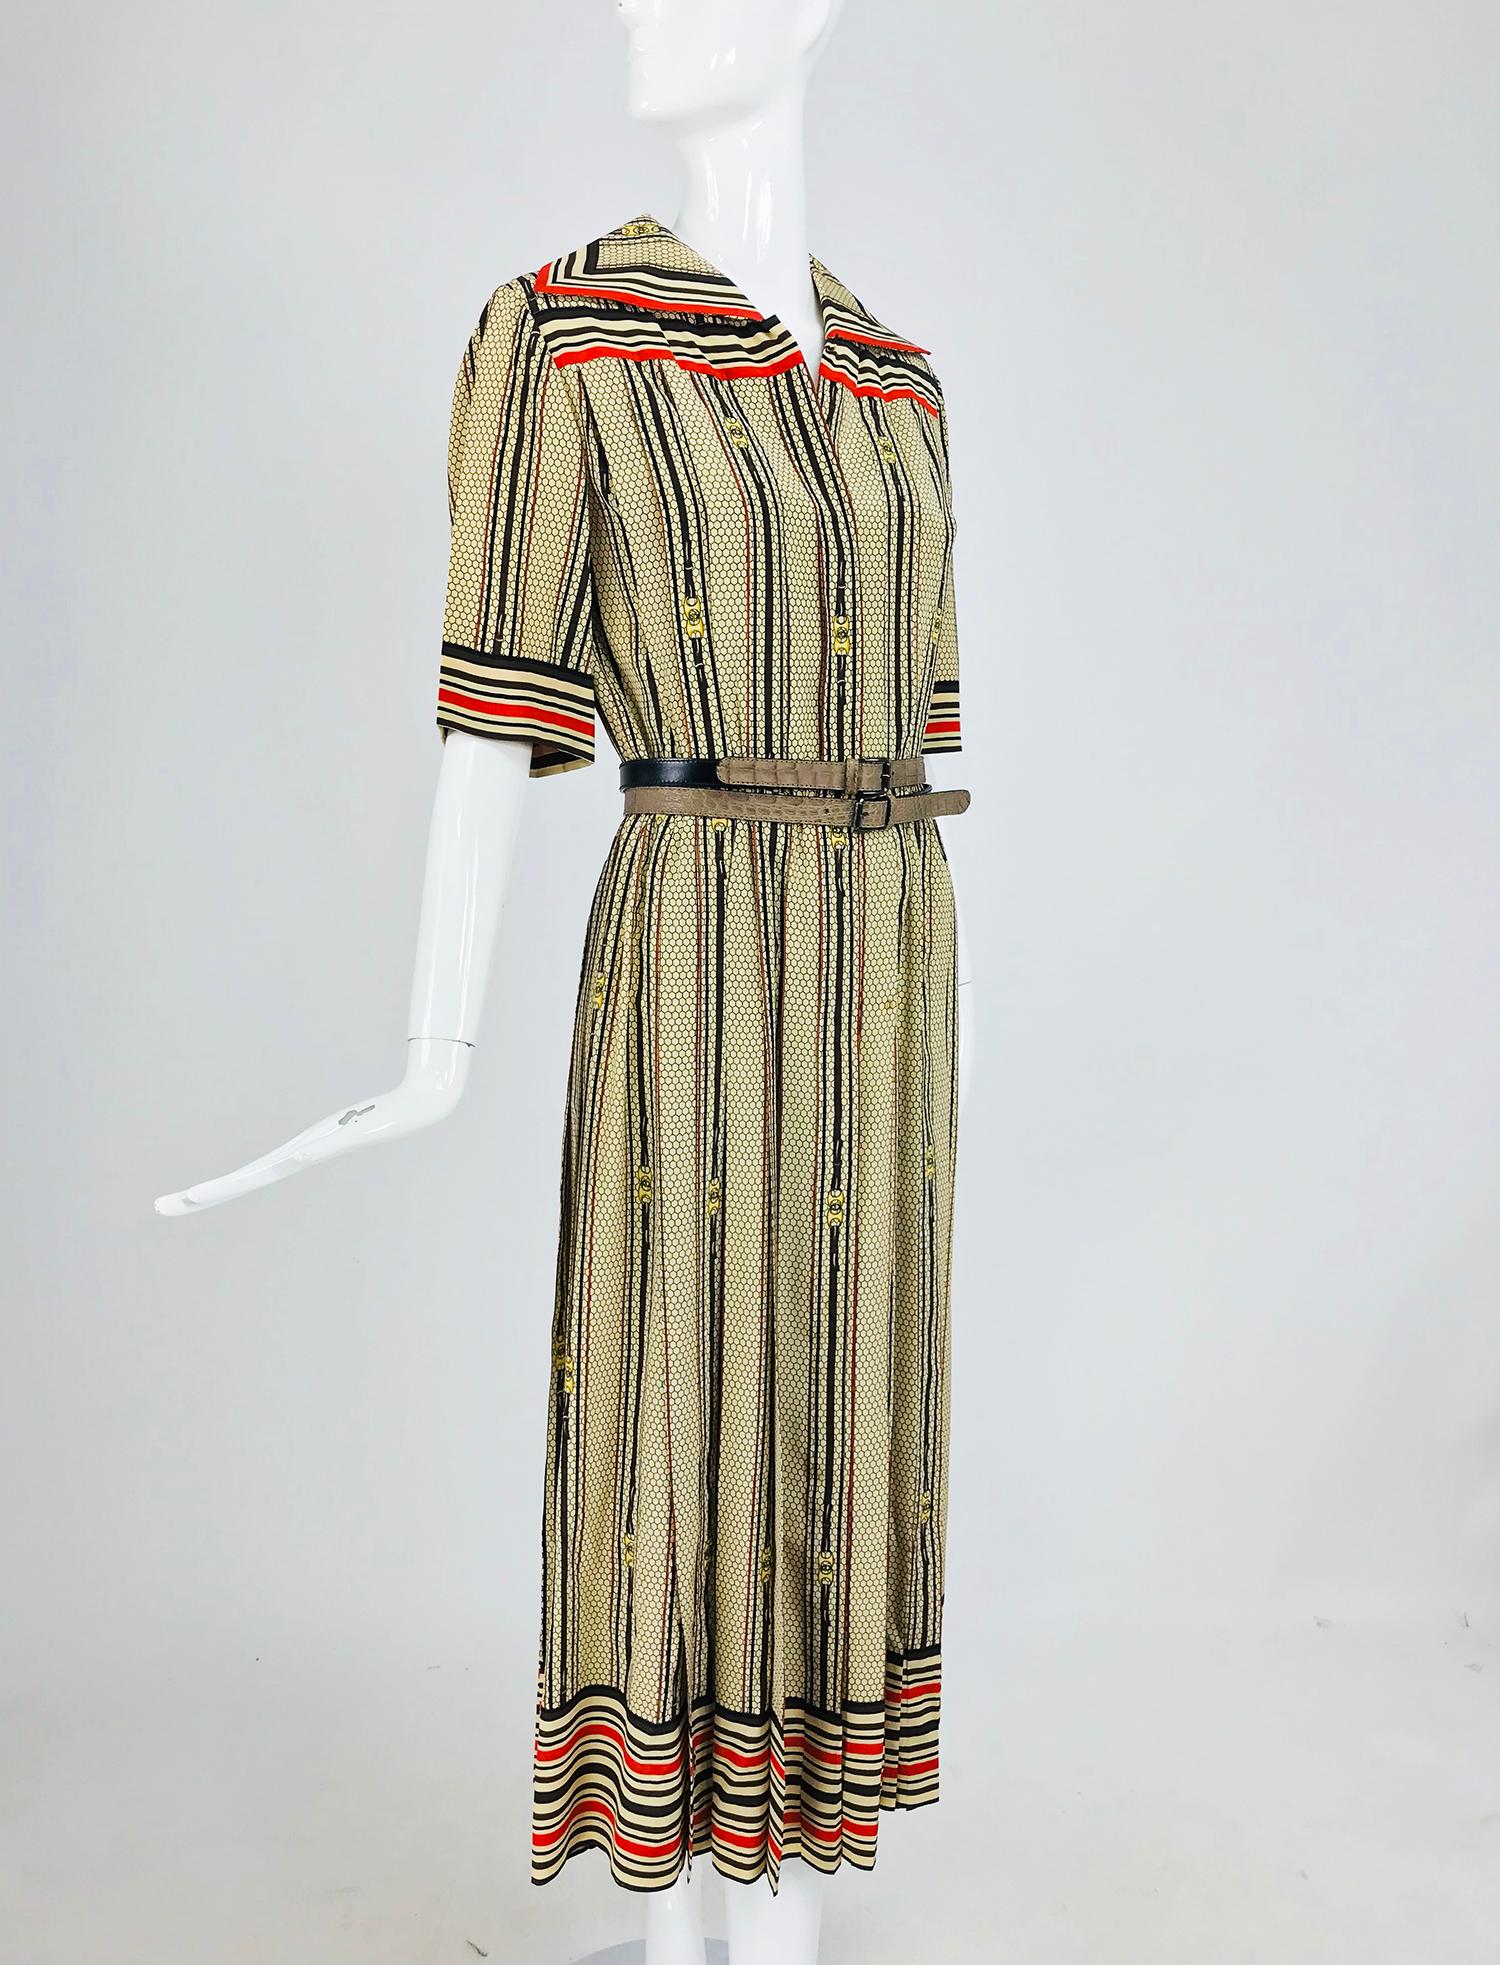 G Gucci silk shirtwaist dress in a rare logo print from the 1970s. An amazing find, this dress is done in tan, black, brown and orange silk, the overall print is a honeycomb grid design with vertical stripes  the center of each group of stripes is a